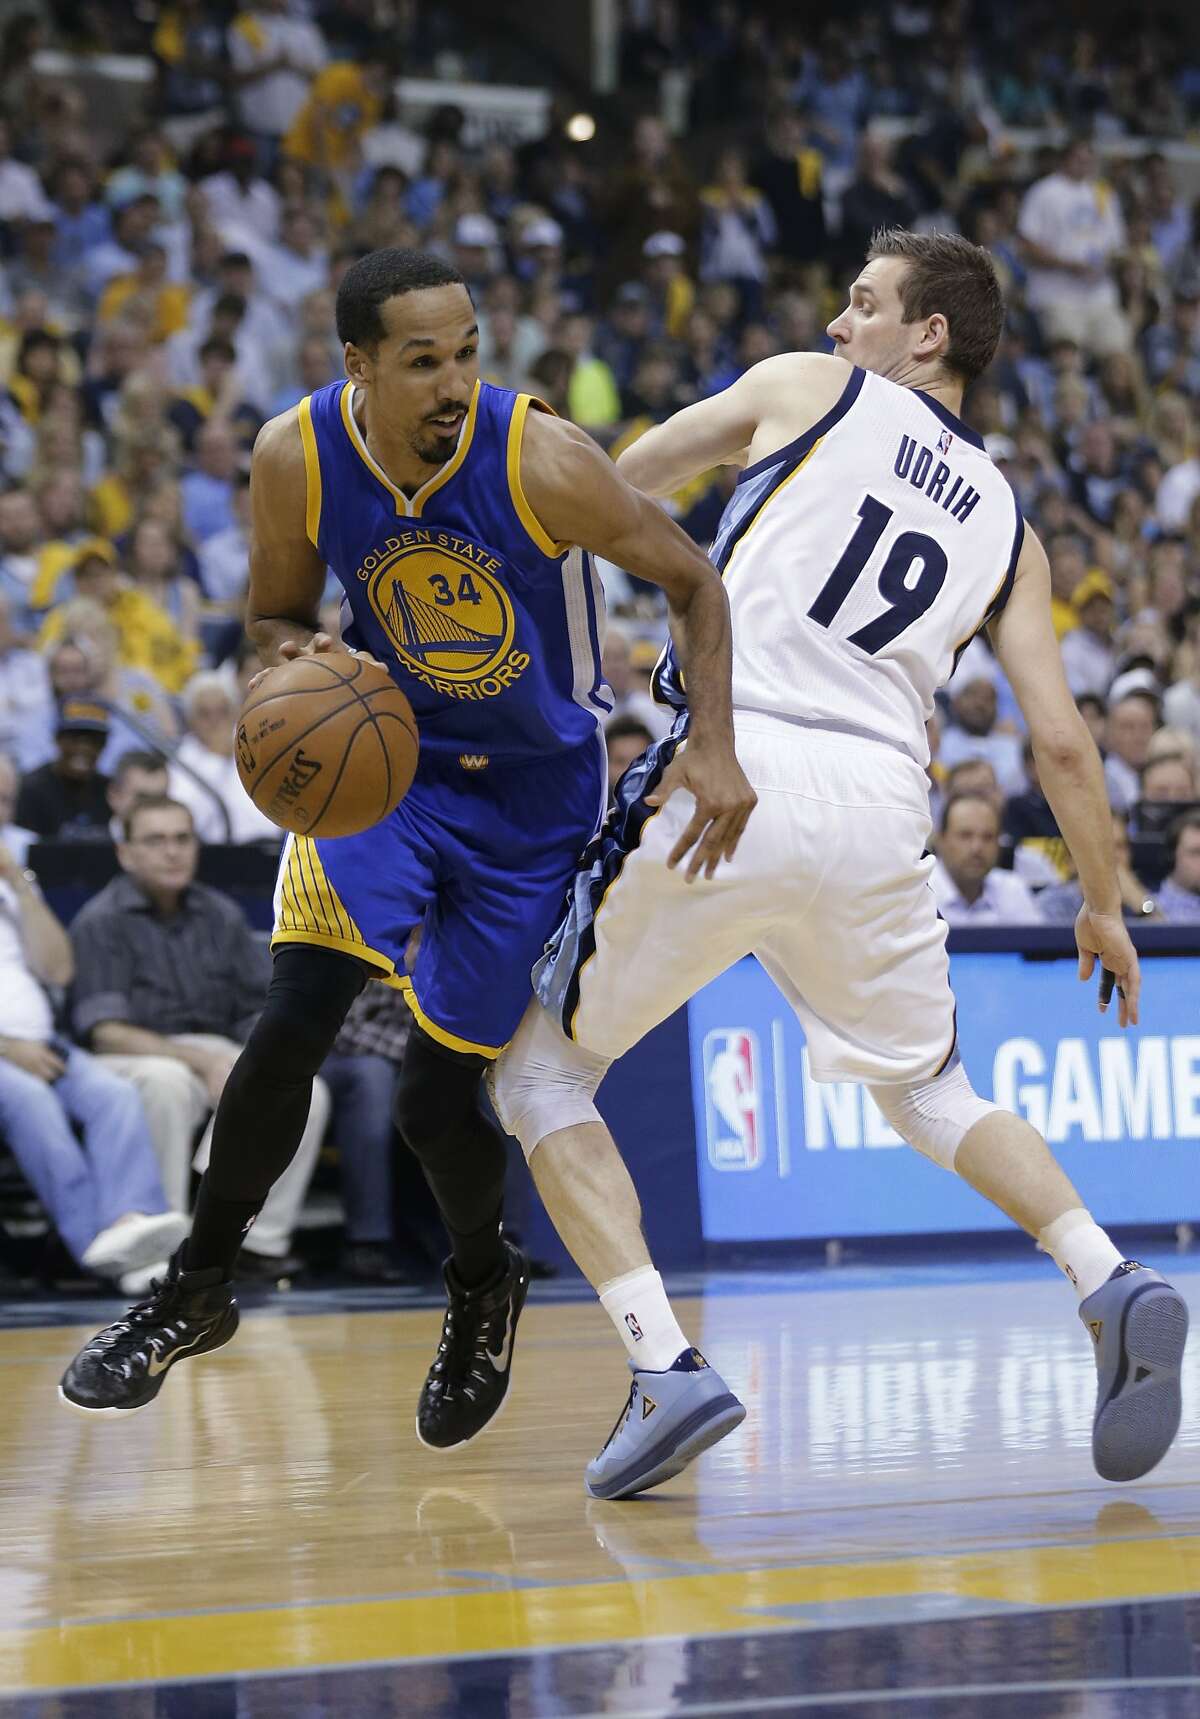 Golden State Warriors guard Shaun Livingston (34) dribbles around Golden State Warriors guard Leandro Barbosa (19), of Brazil, during the first half of Game 6 of a second-round NBA basketball Western Conference playoff series Friday, May 15, 2015, in Memphis, Tenn. (AP Photo/Mark Humphrey)